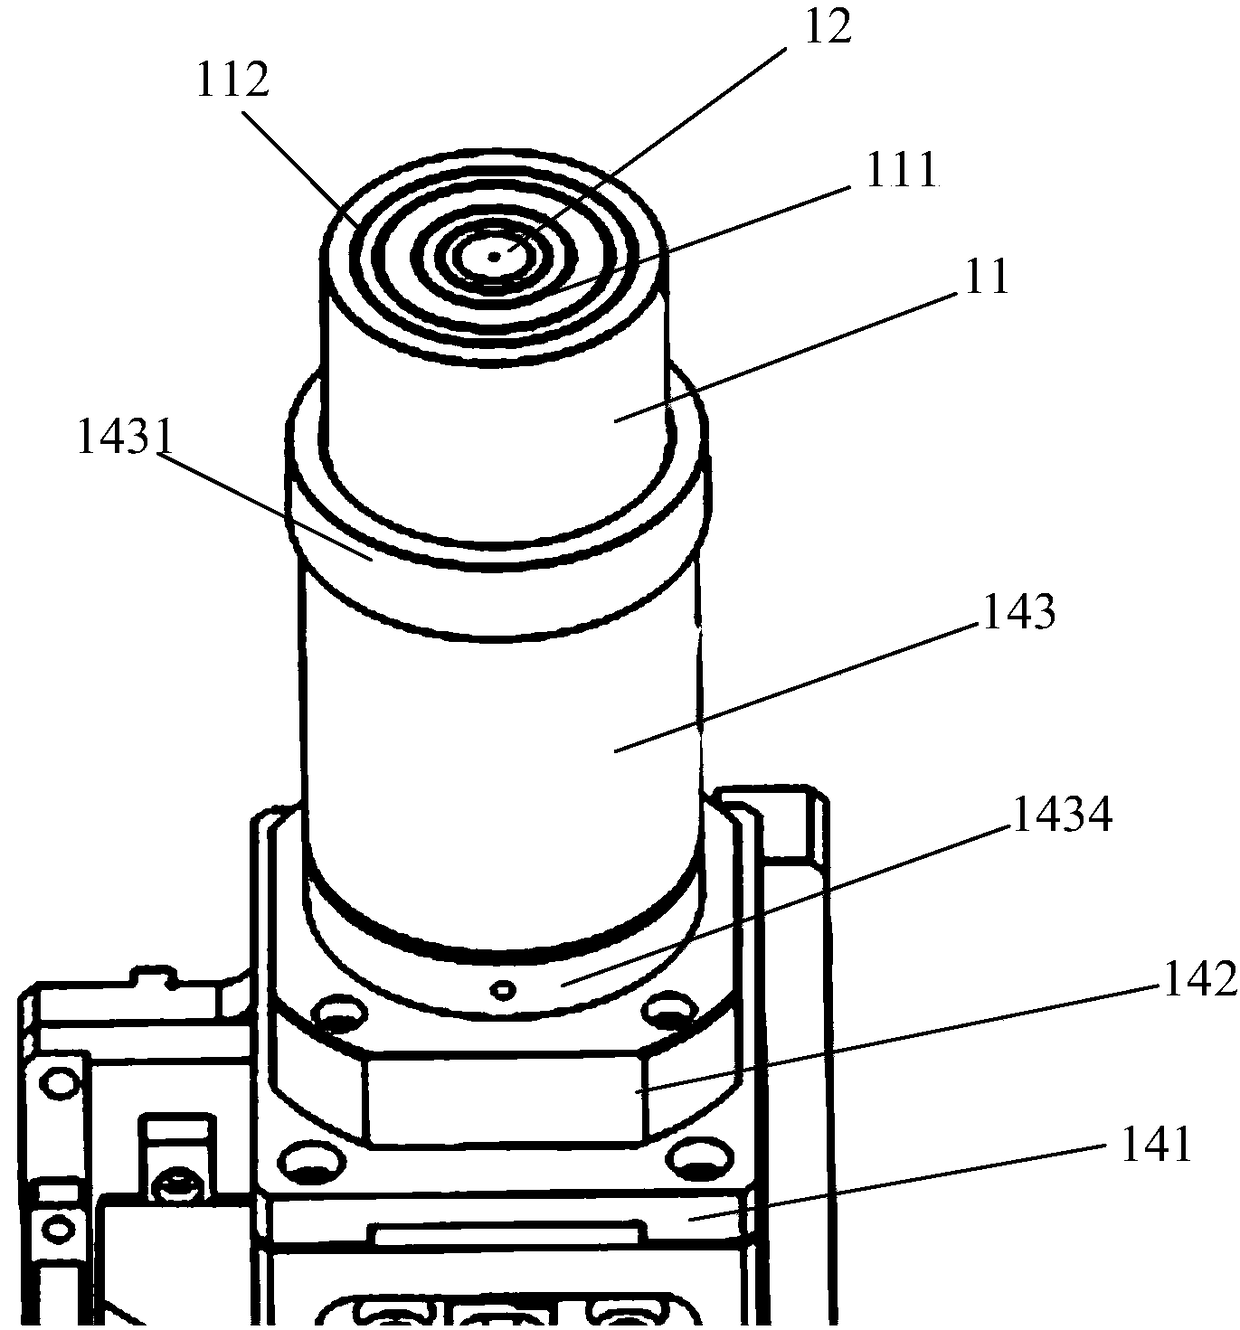 Chip stripping device